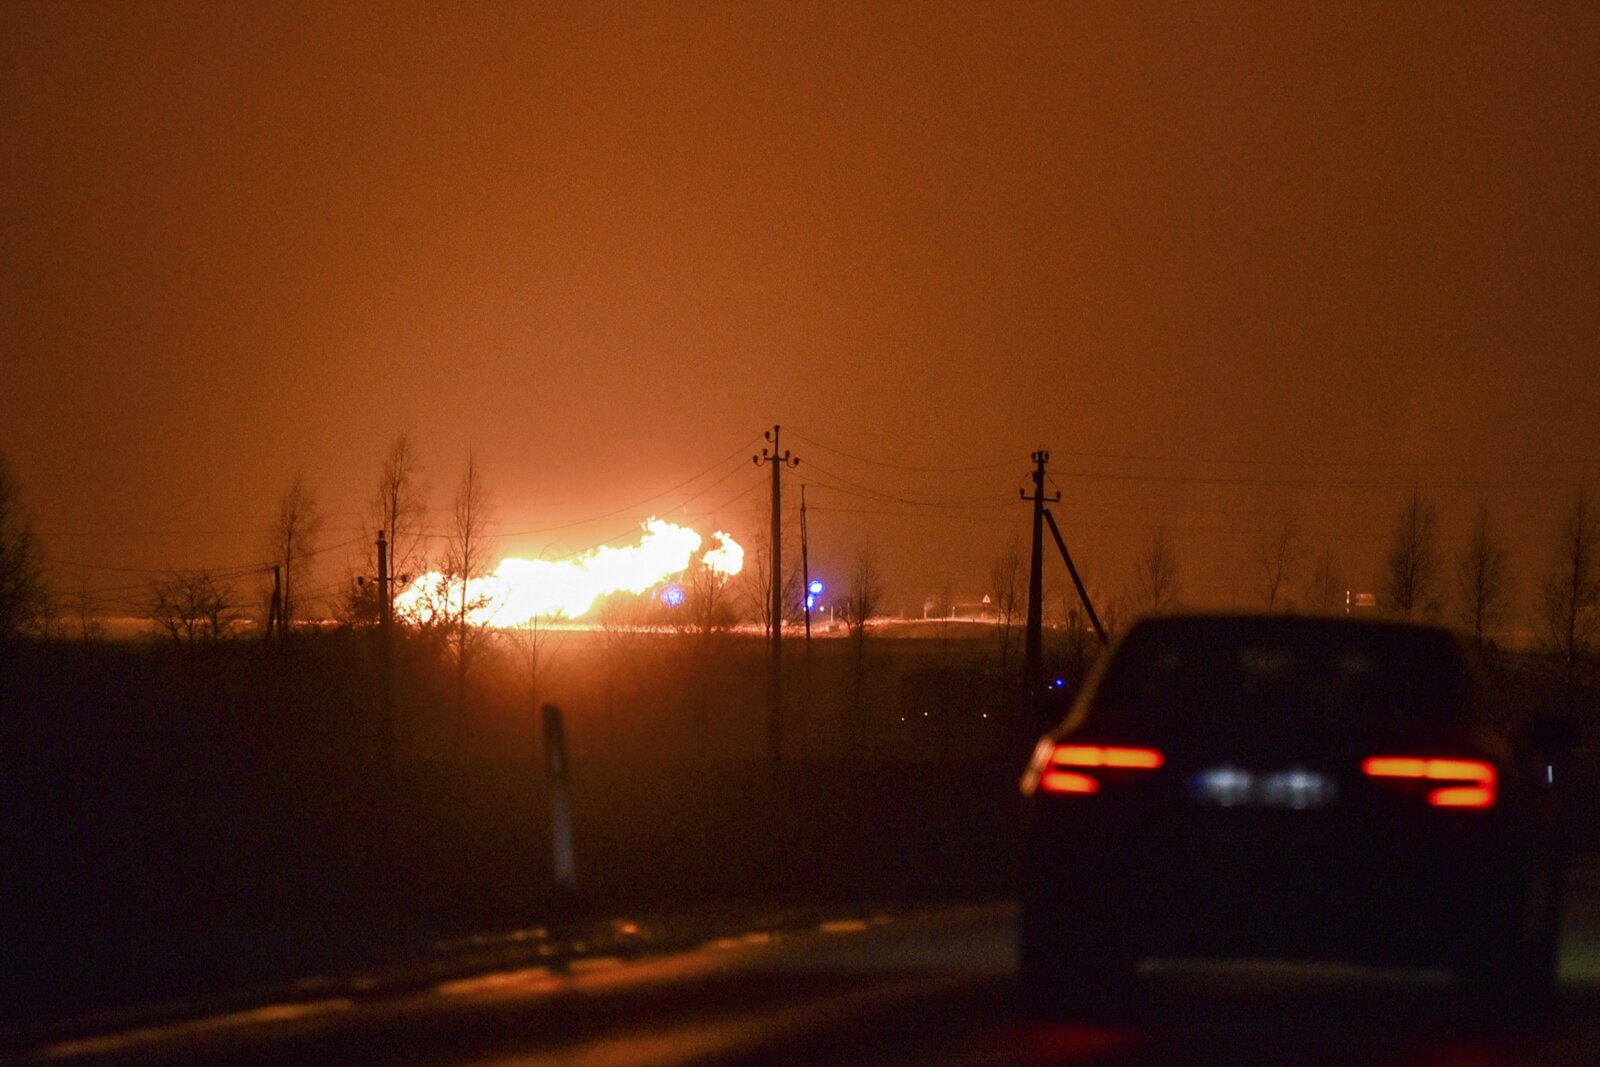 1200066 Lithuania Pipeline Explosion 65160 1600x1067 